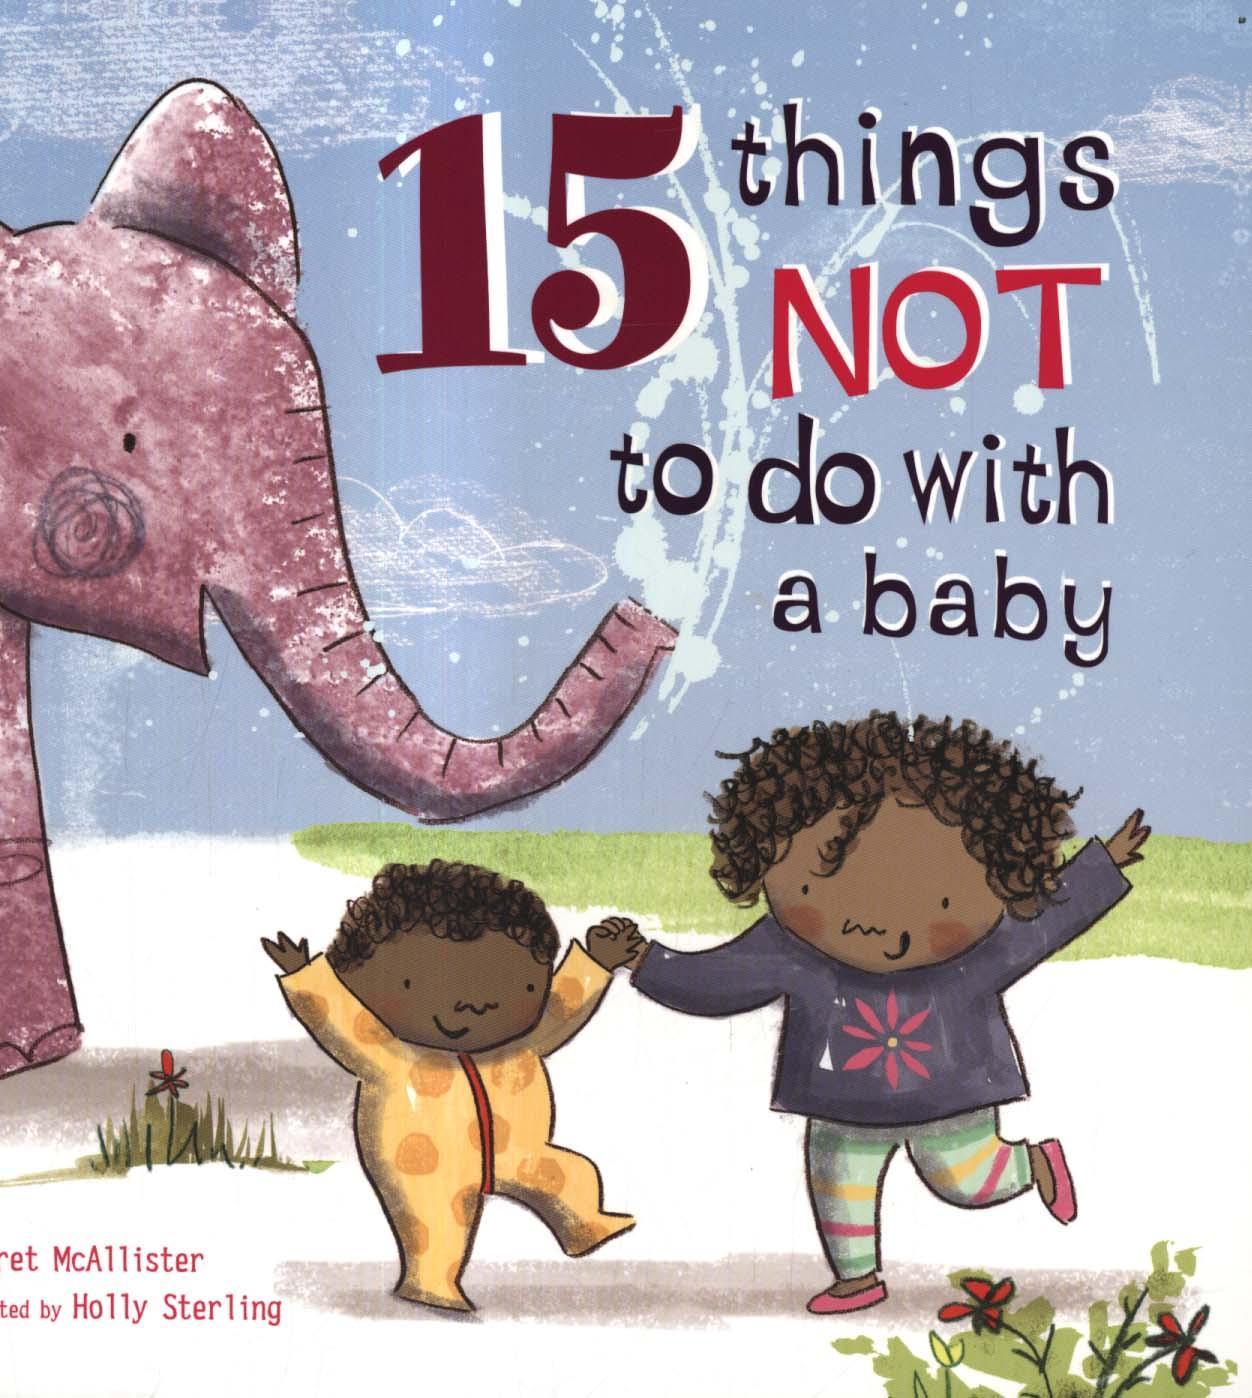 15 Things Not to Do with a Baby